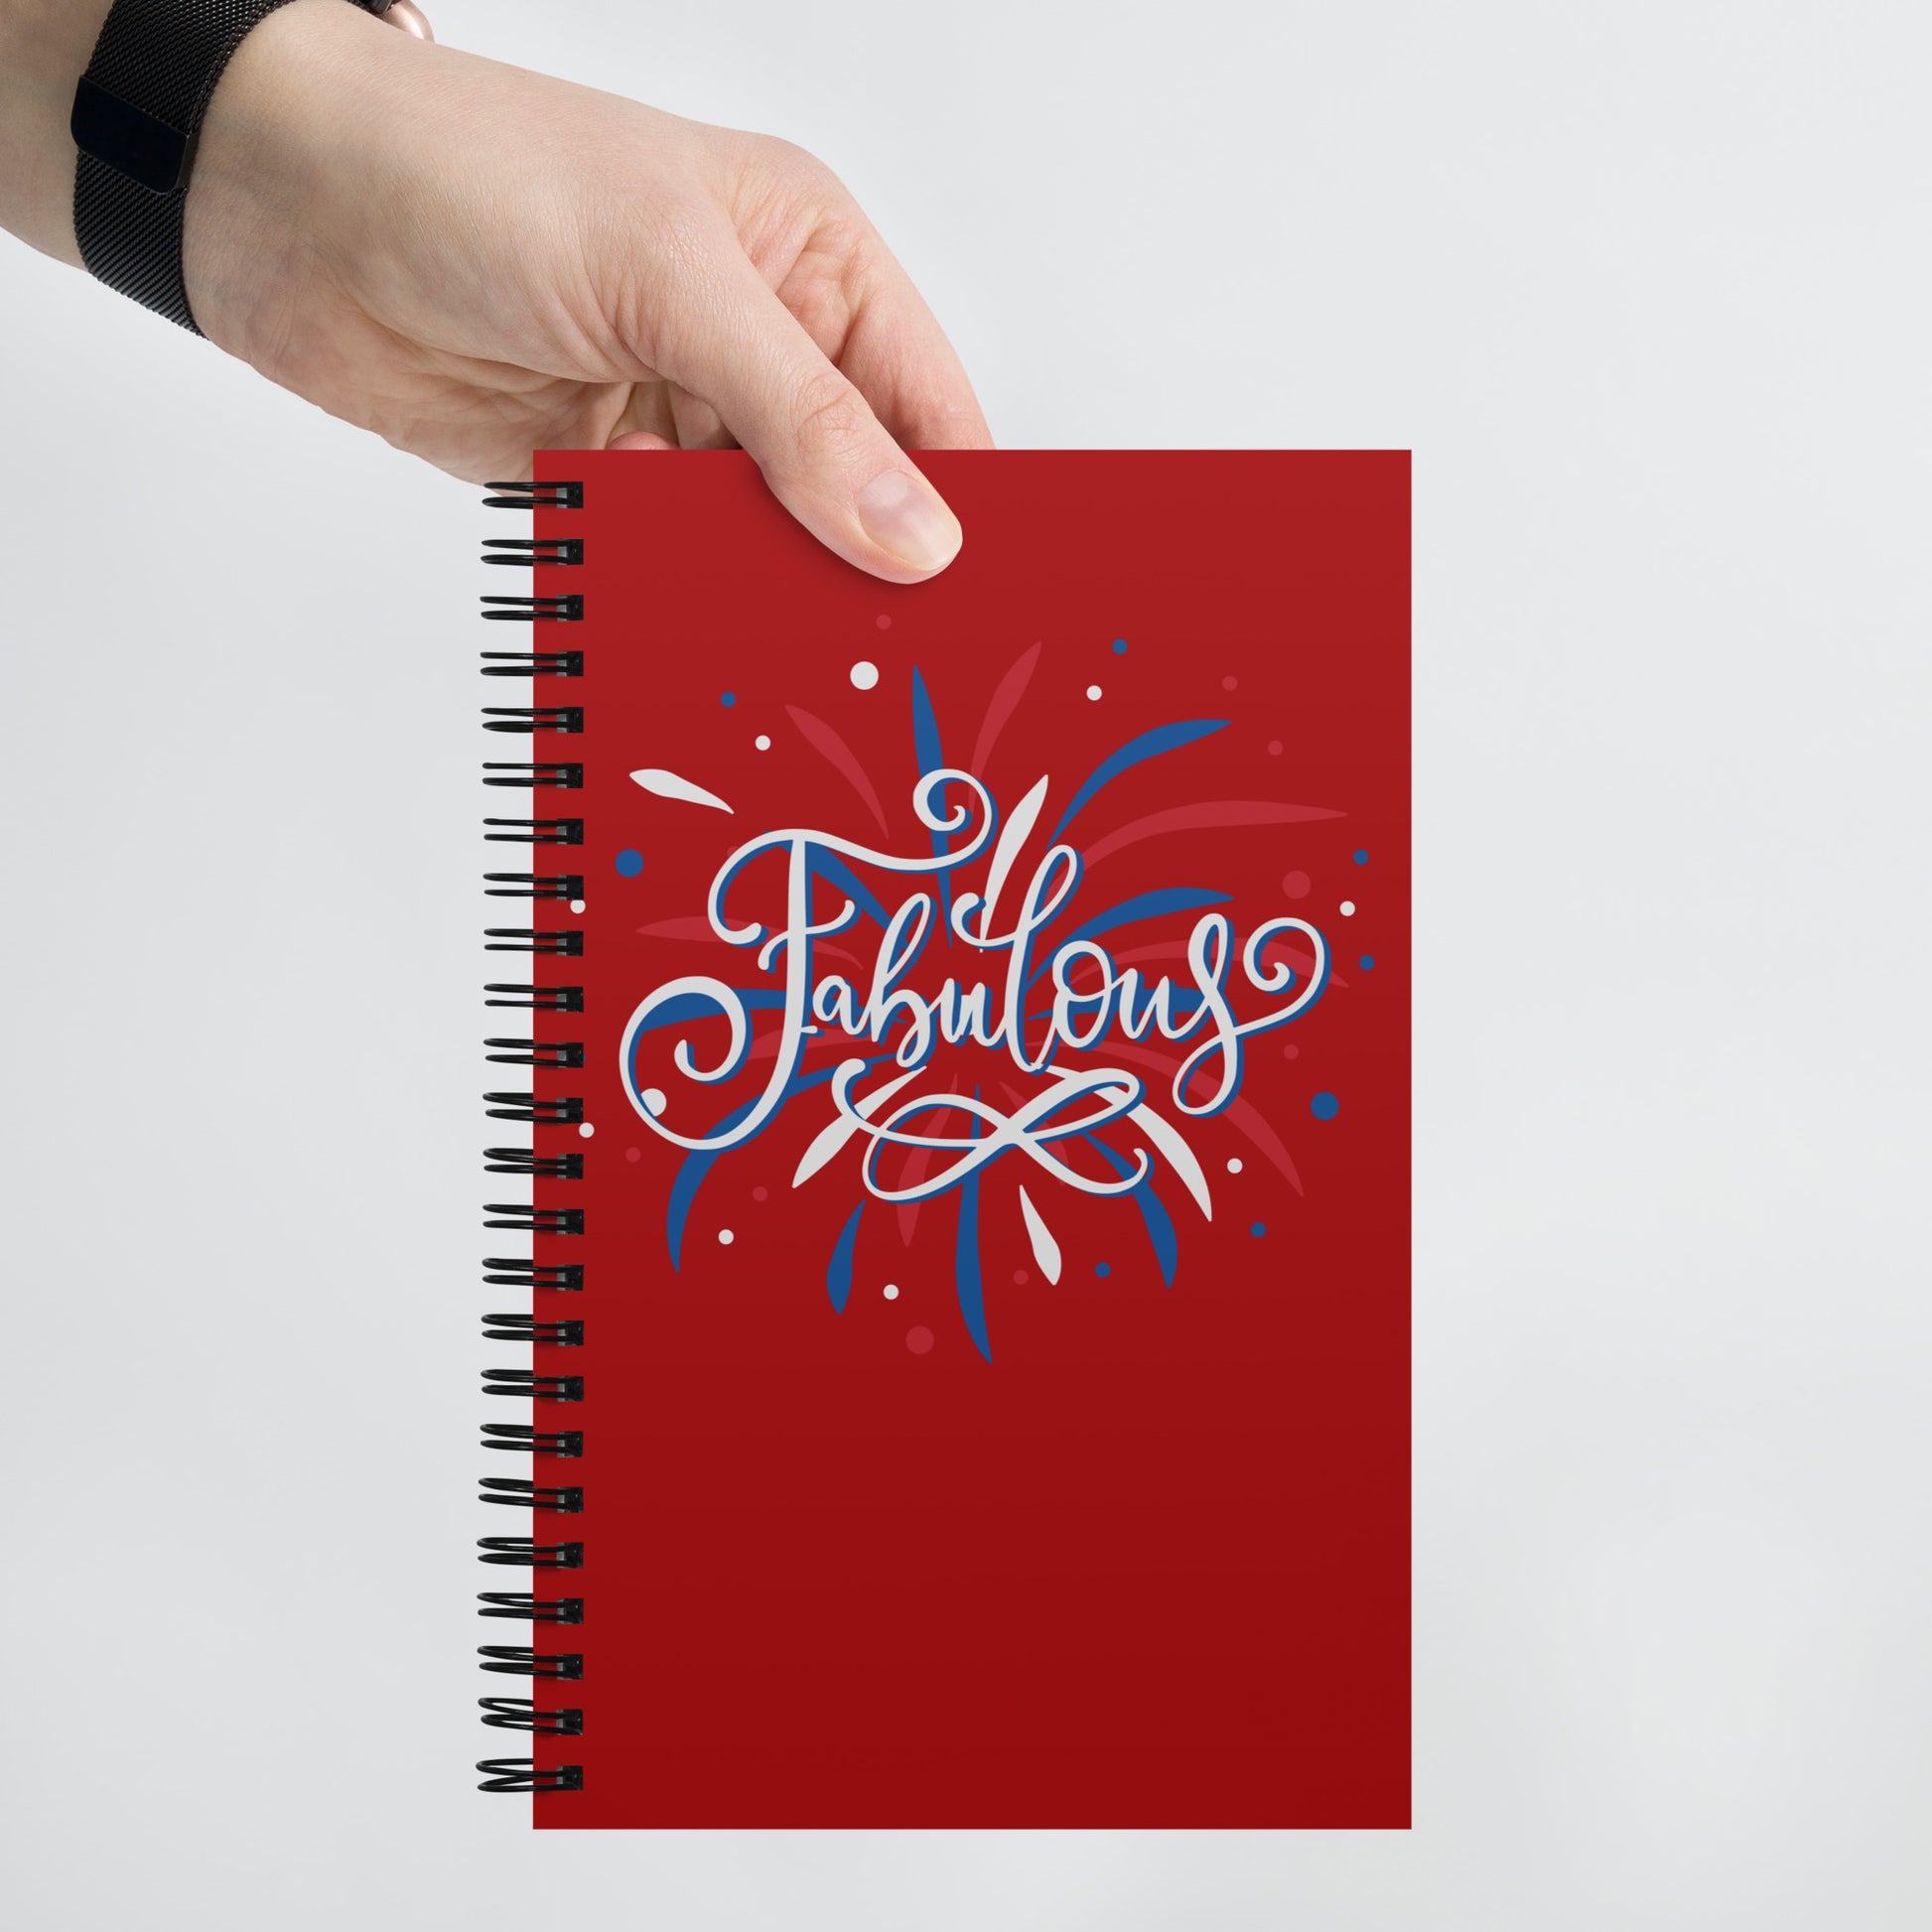 Fabulous spiral-notebook-white-front-in hand